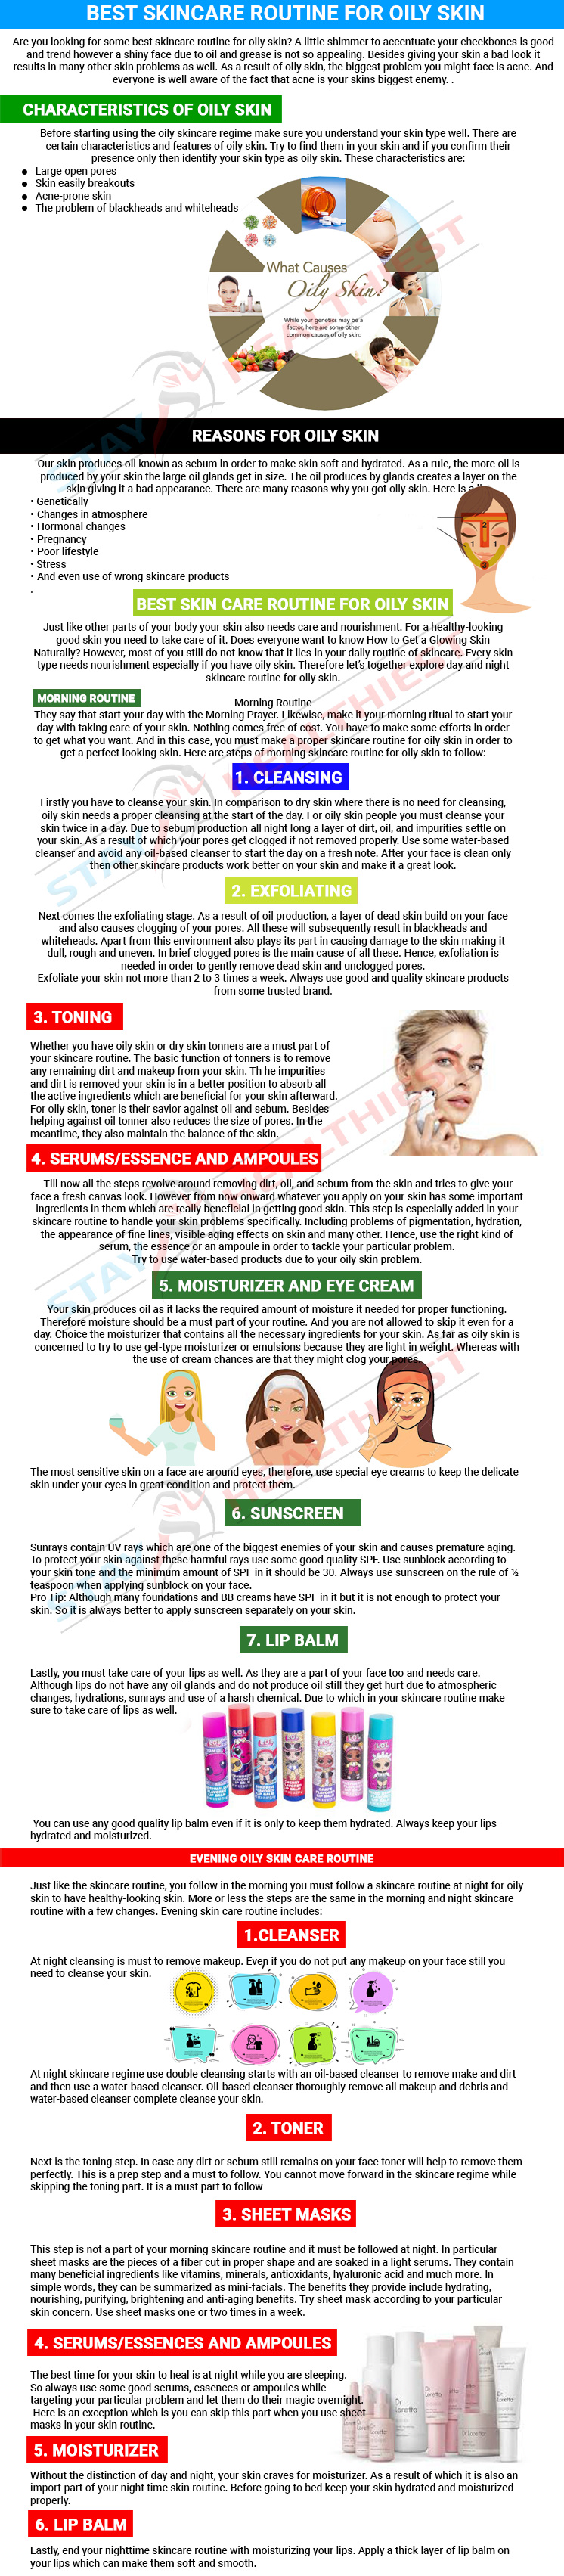 Best Skin Care Routine for Oily Skin